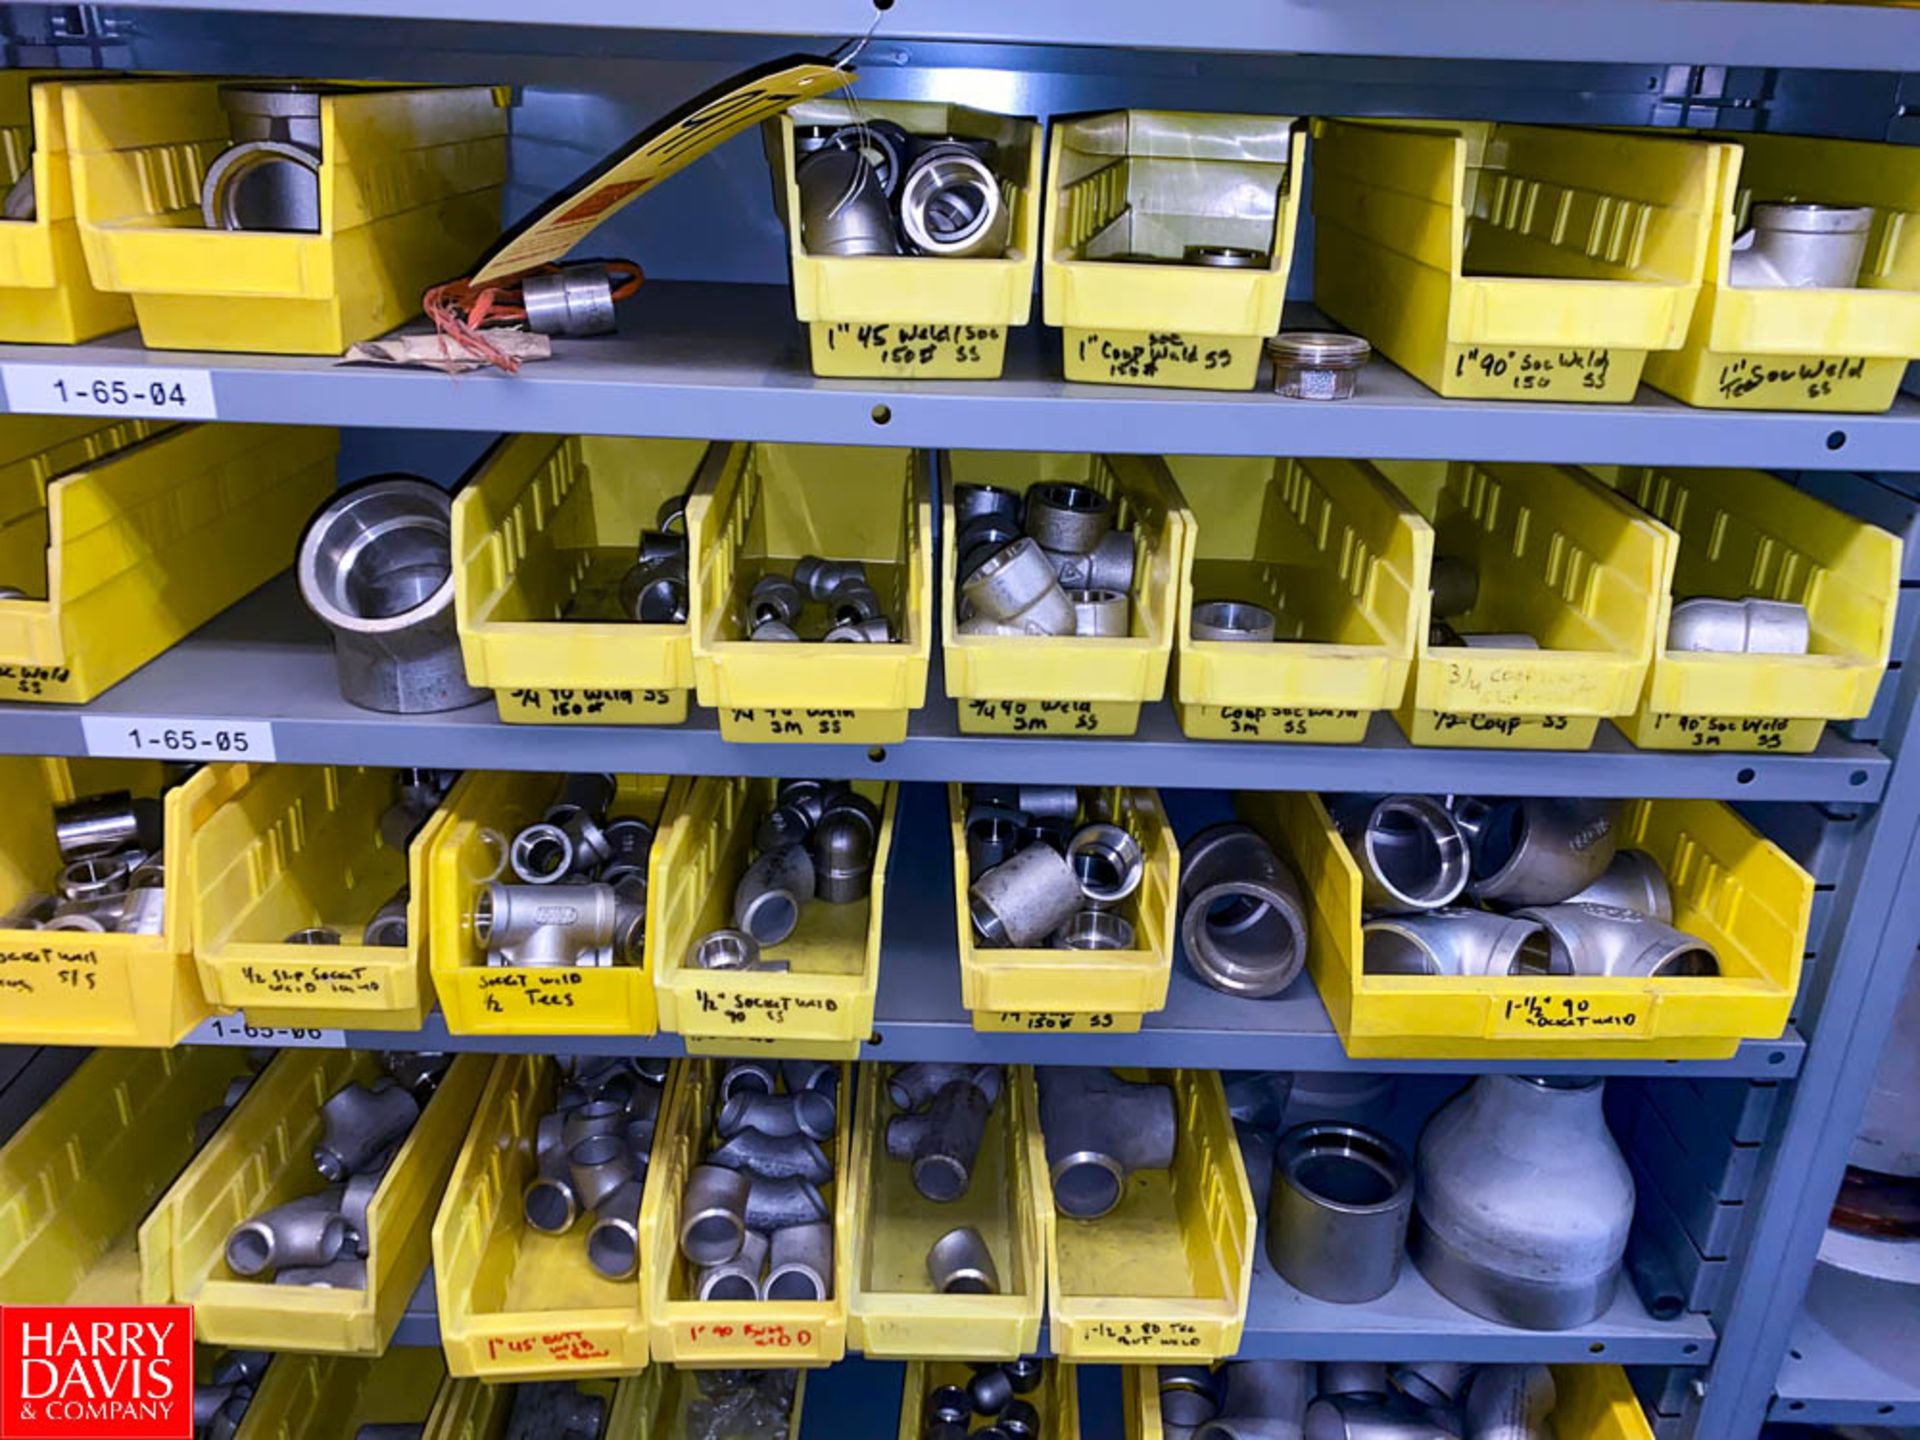 S/S Pipe Fittings Including Elbows, Reducers, Hose Fittings, Connectors, Up to 3", ETC. - Rigging - Image 3 of 4